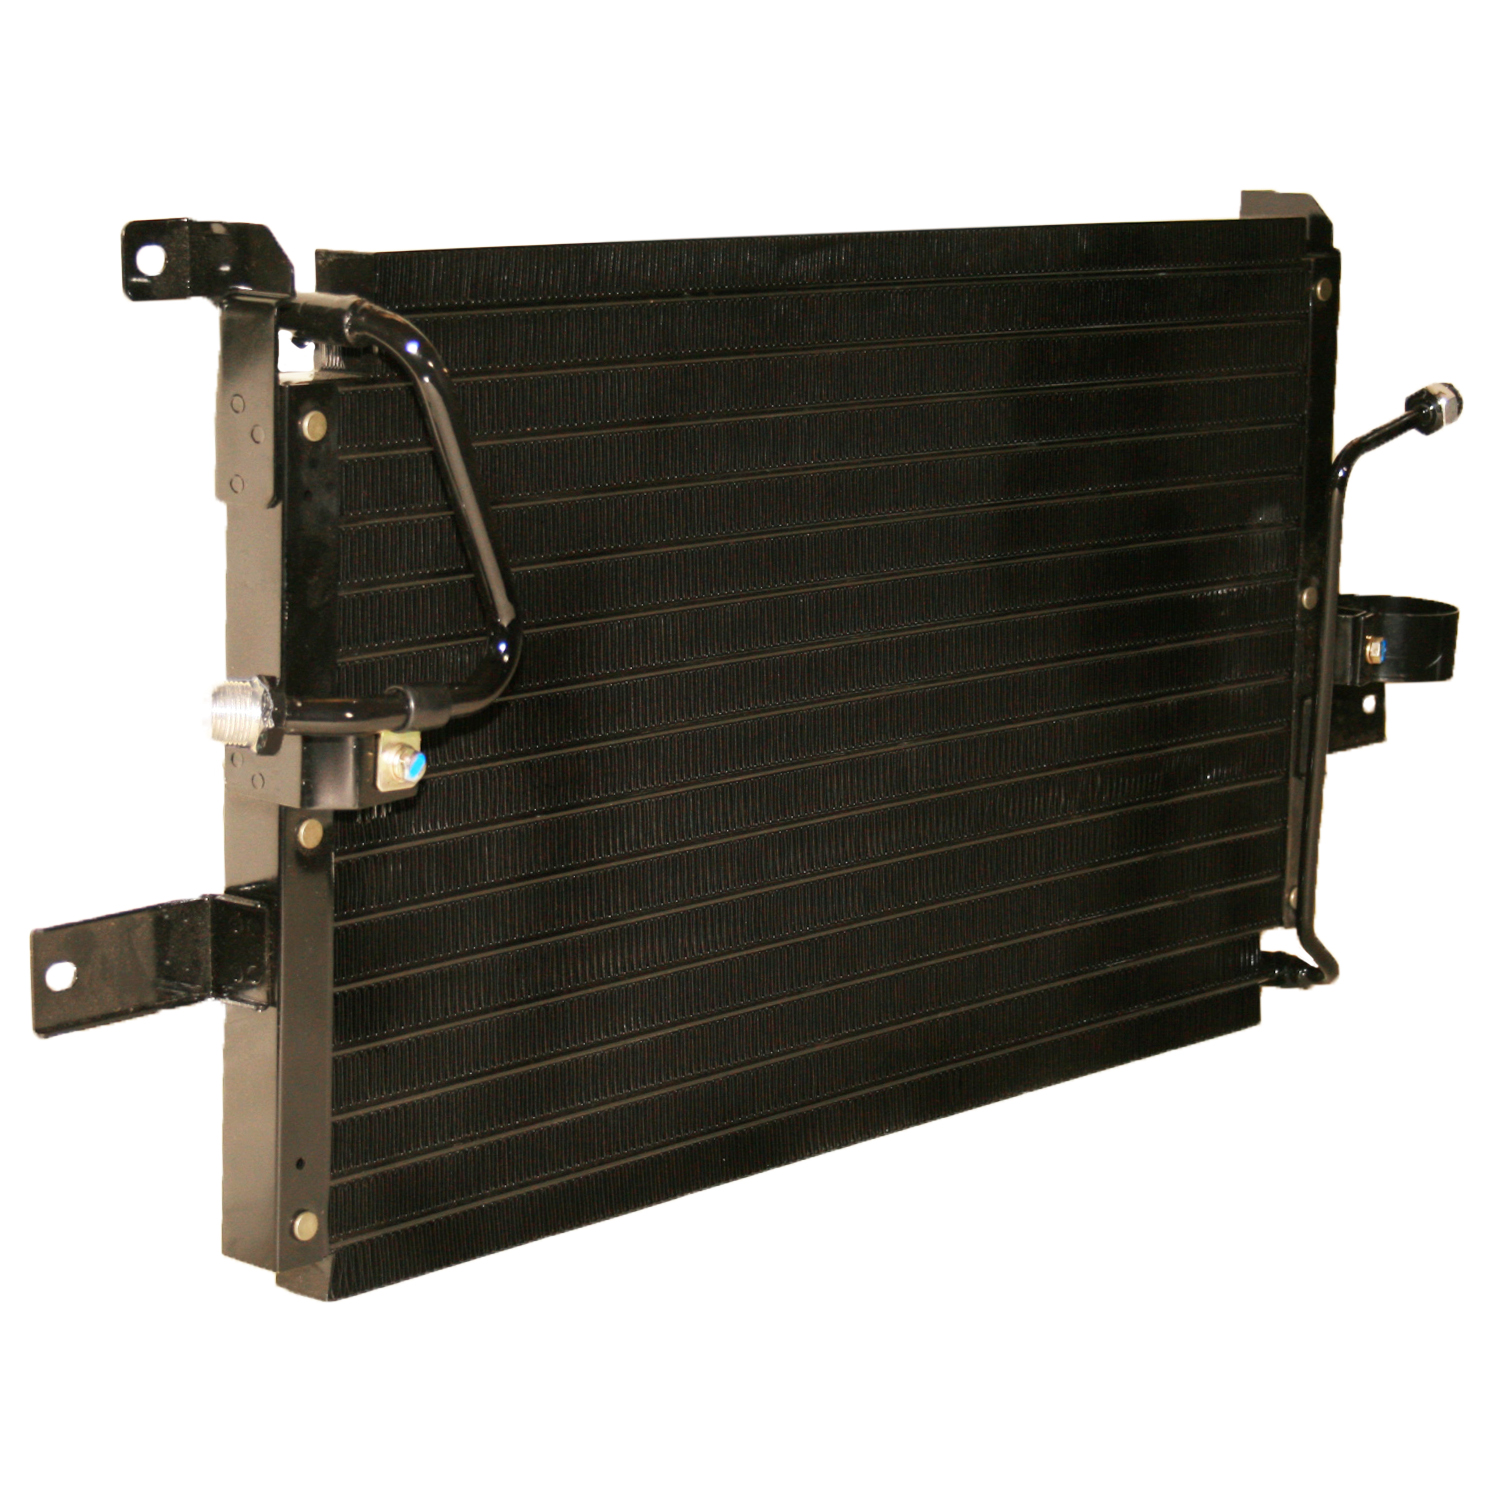 TCW Condenser 44-3973 New Product Image field_60b6a13a6e67c